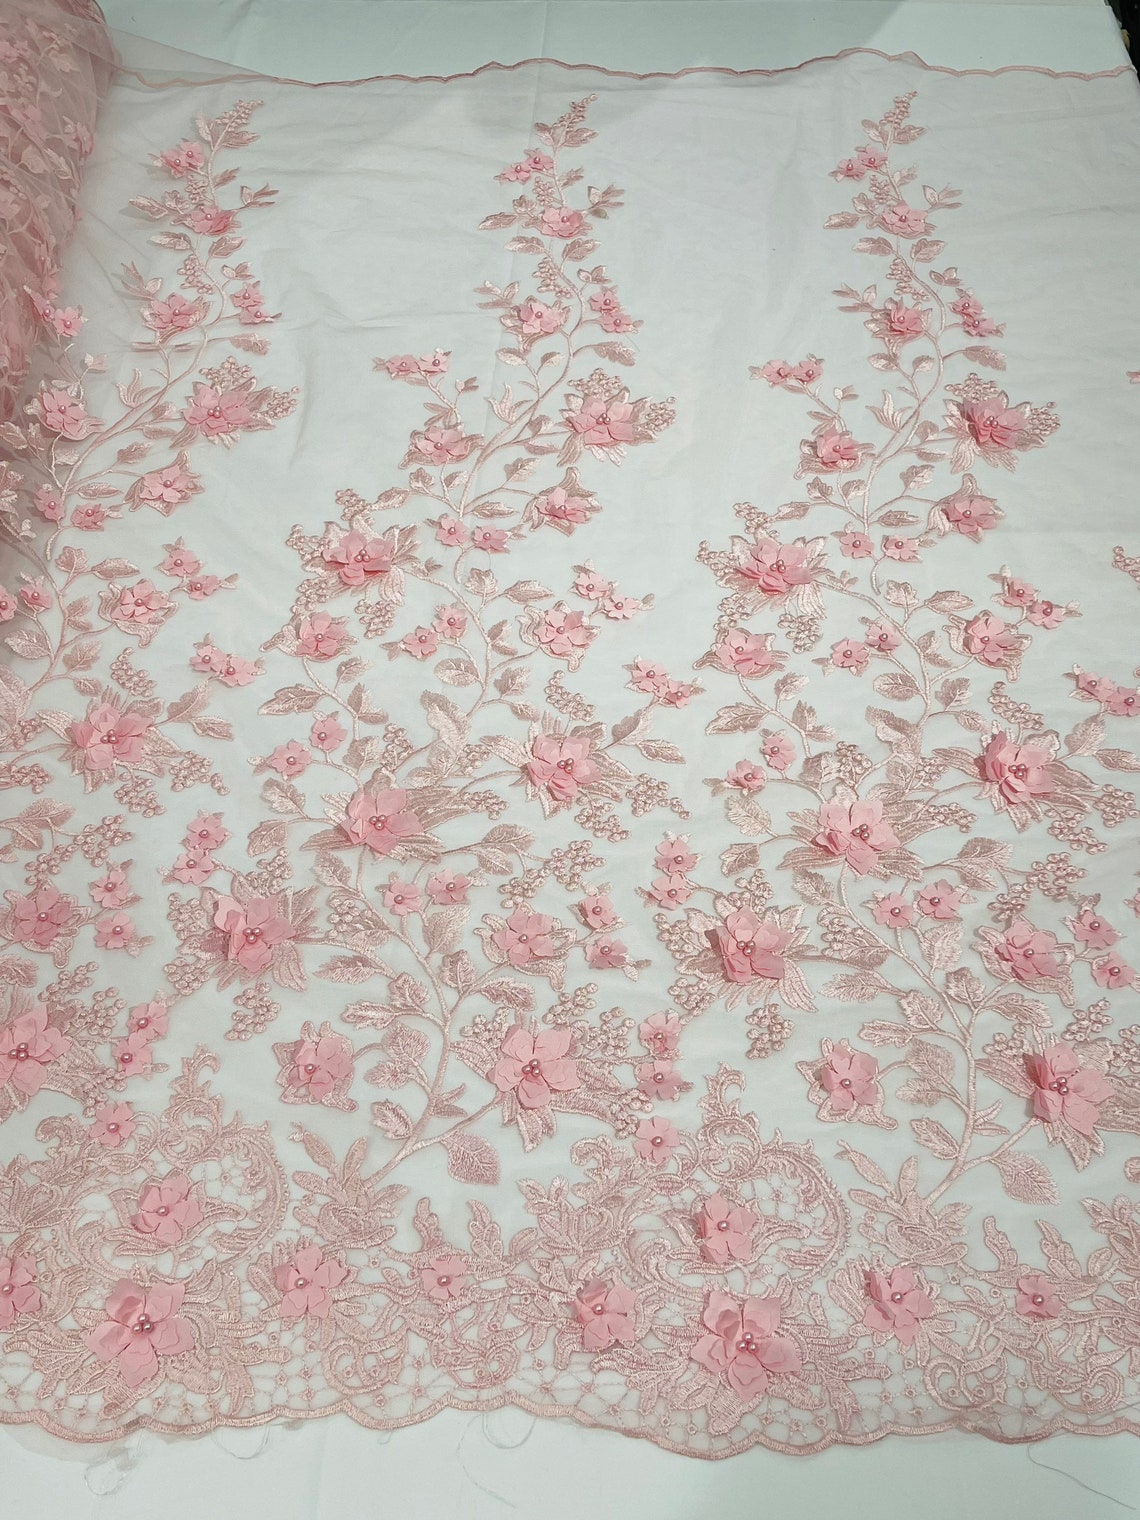 3D Floral Princess Fabric - Pink - Embroidered Floral Lace Fabric with 3D Flowers By Yard